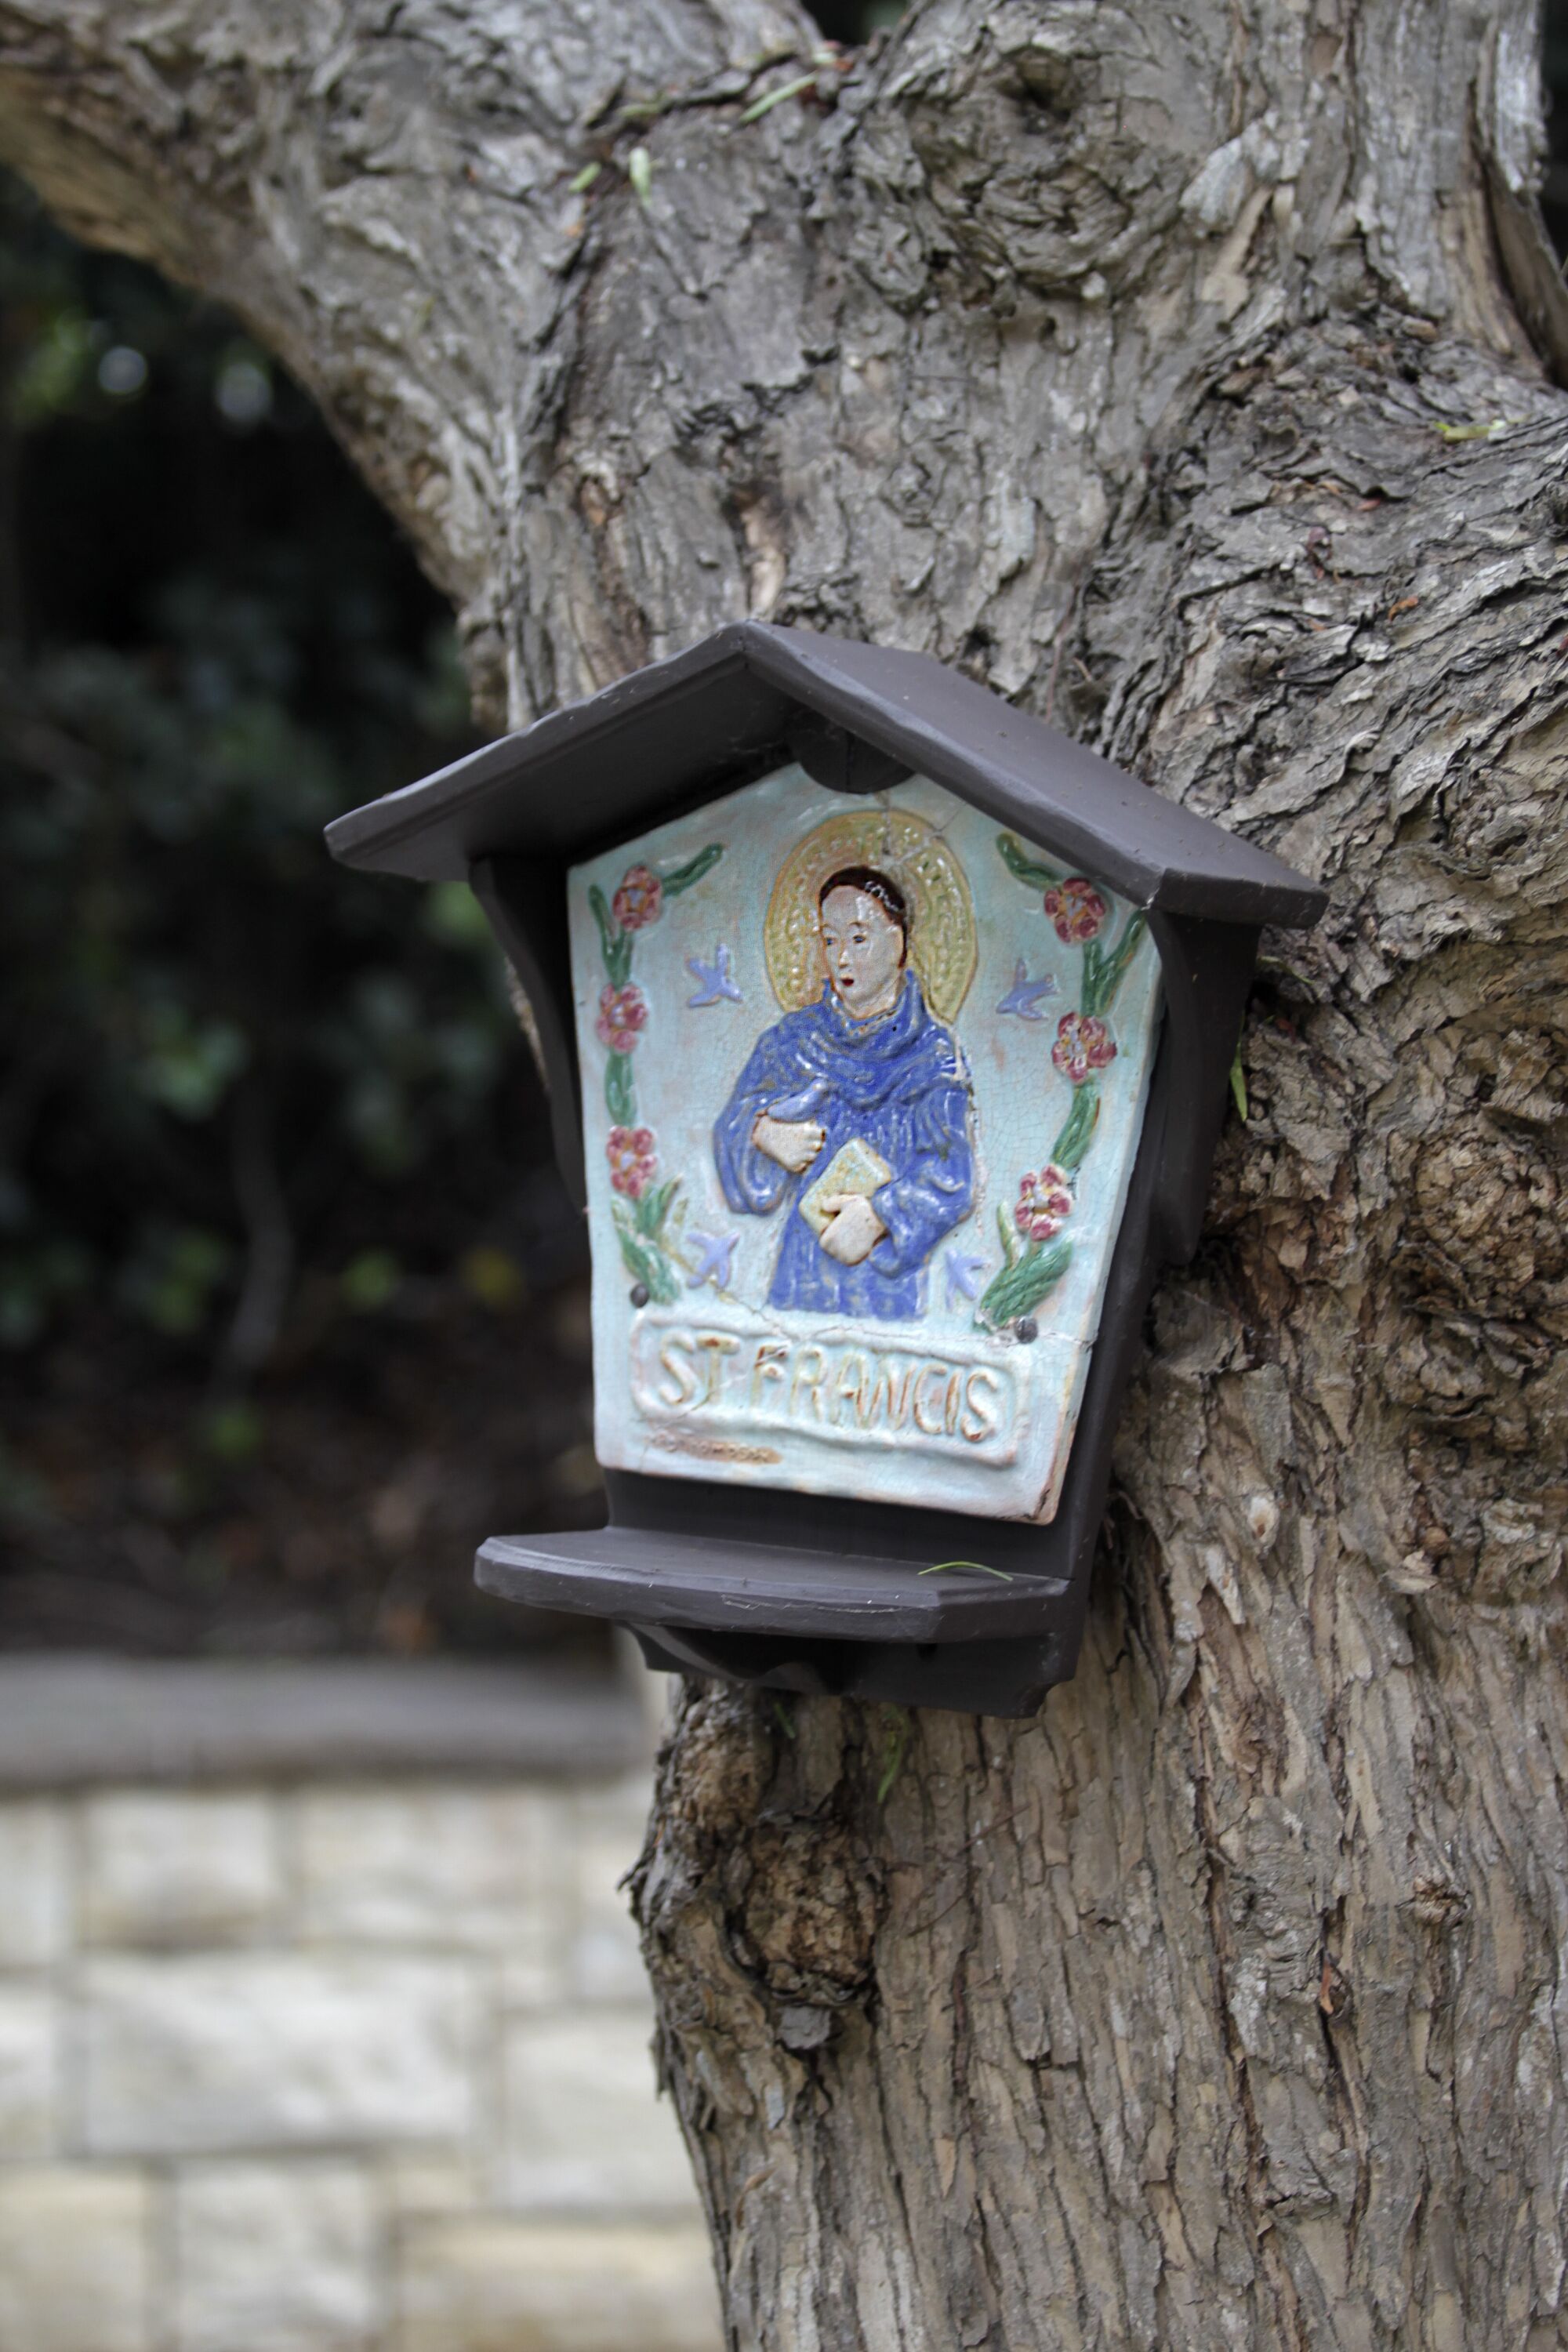 An image of St. Francis anchors the St. Francis garden at the Self-Realization Fellowship Meditation Gardens in Encinitas.